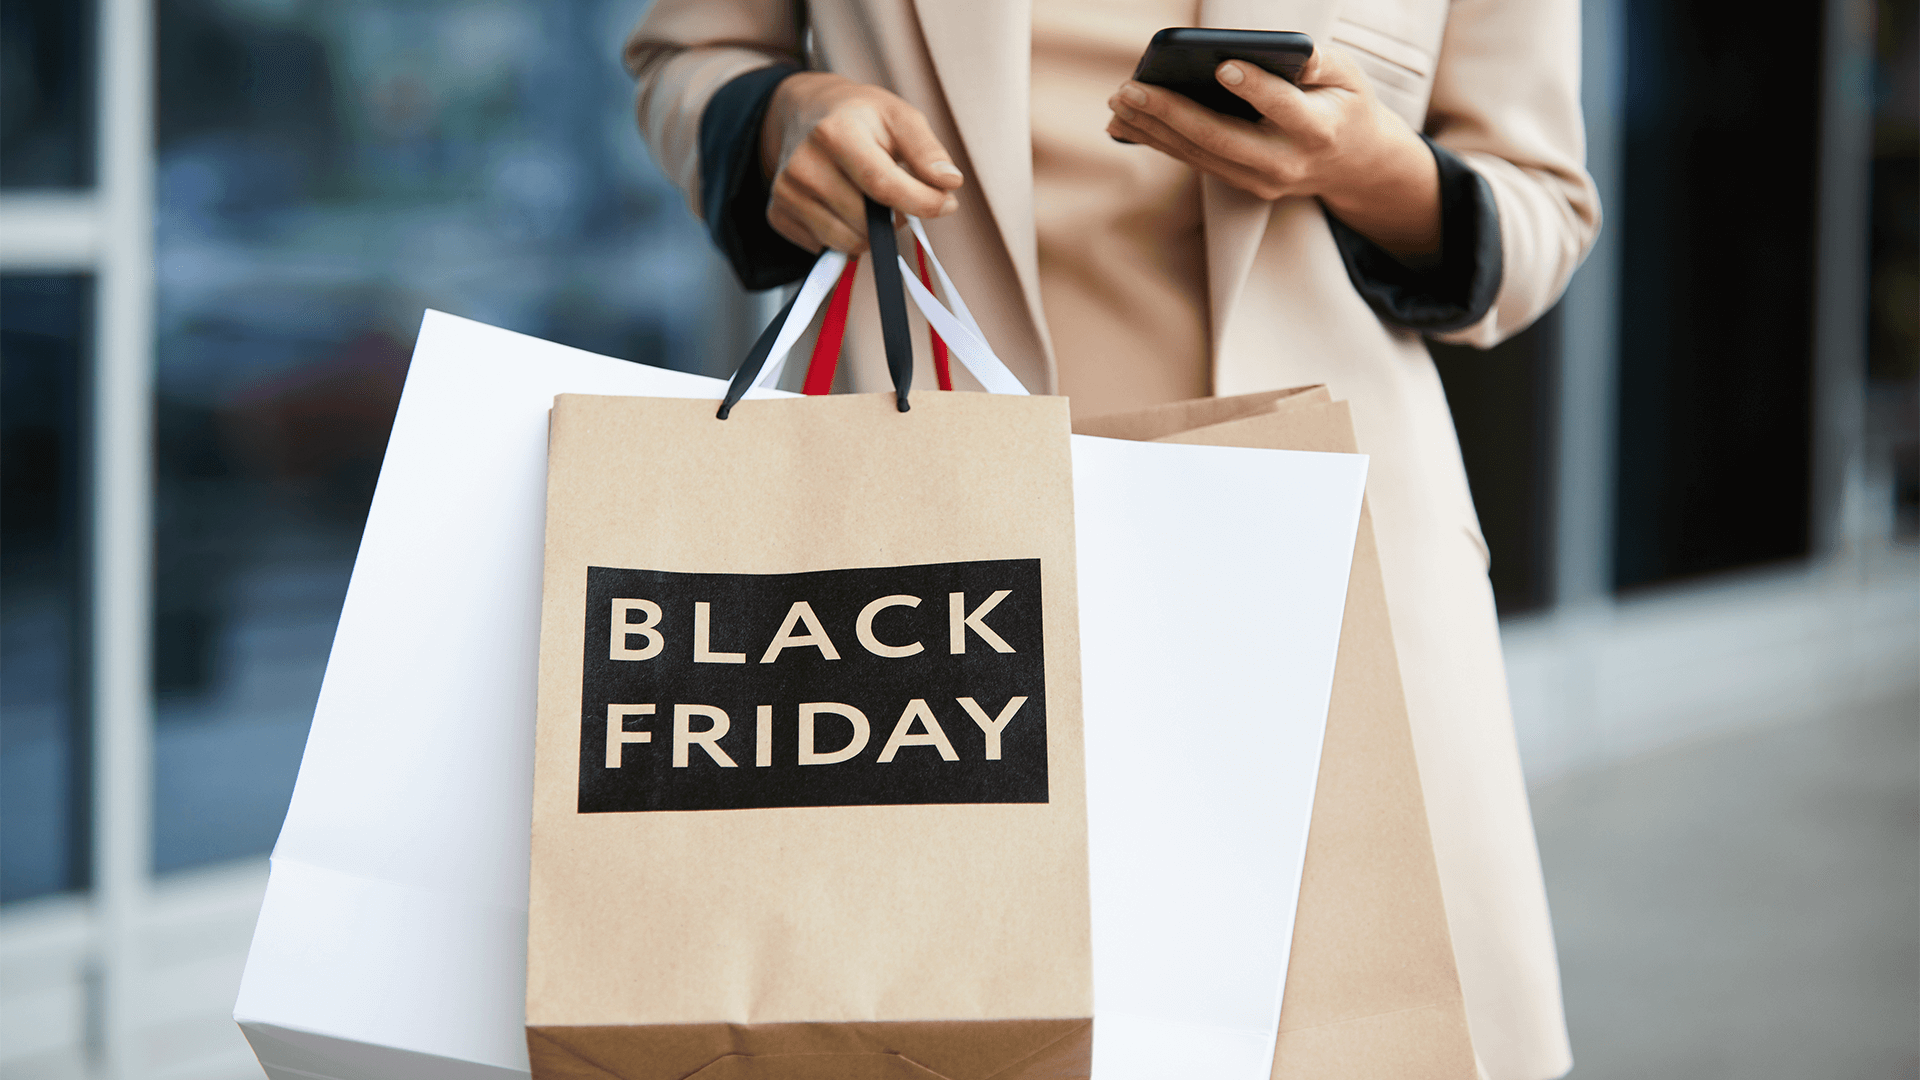 Mid-section portrait of stylish young woman holding shopping bags with Black Friday and texting on the go while leaving mall